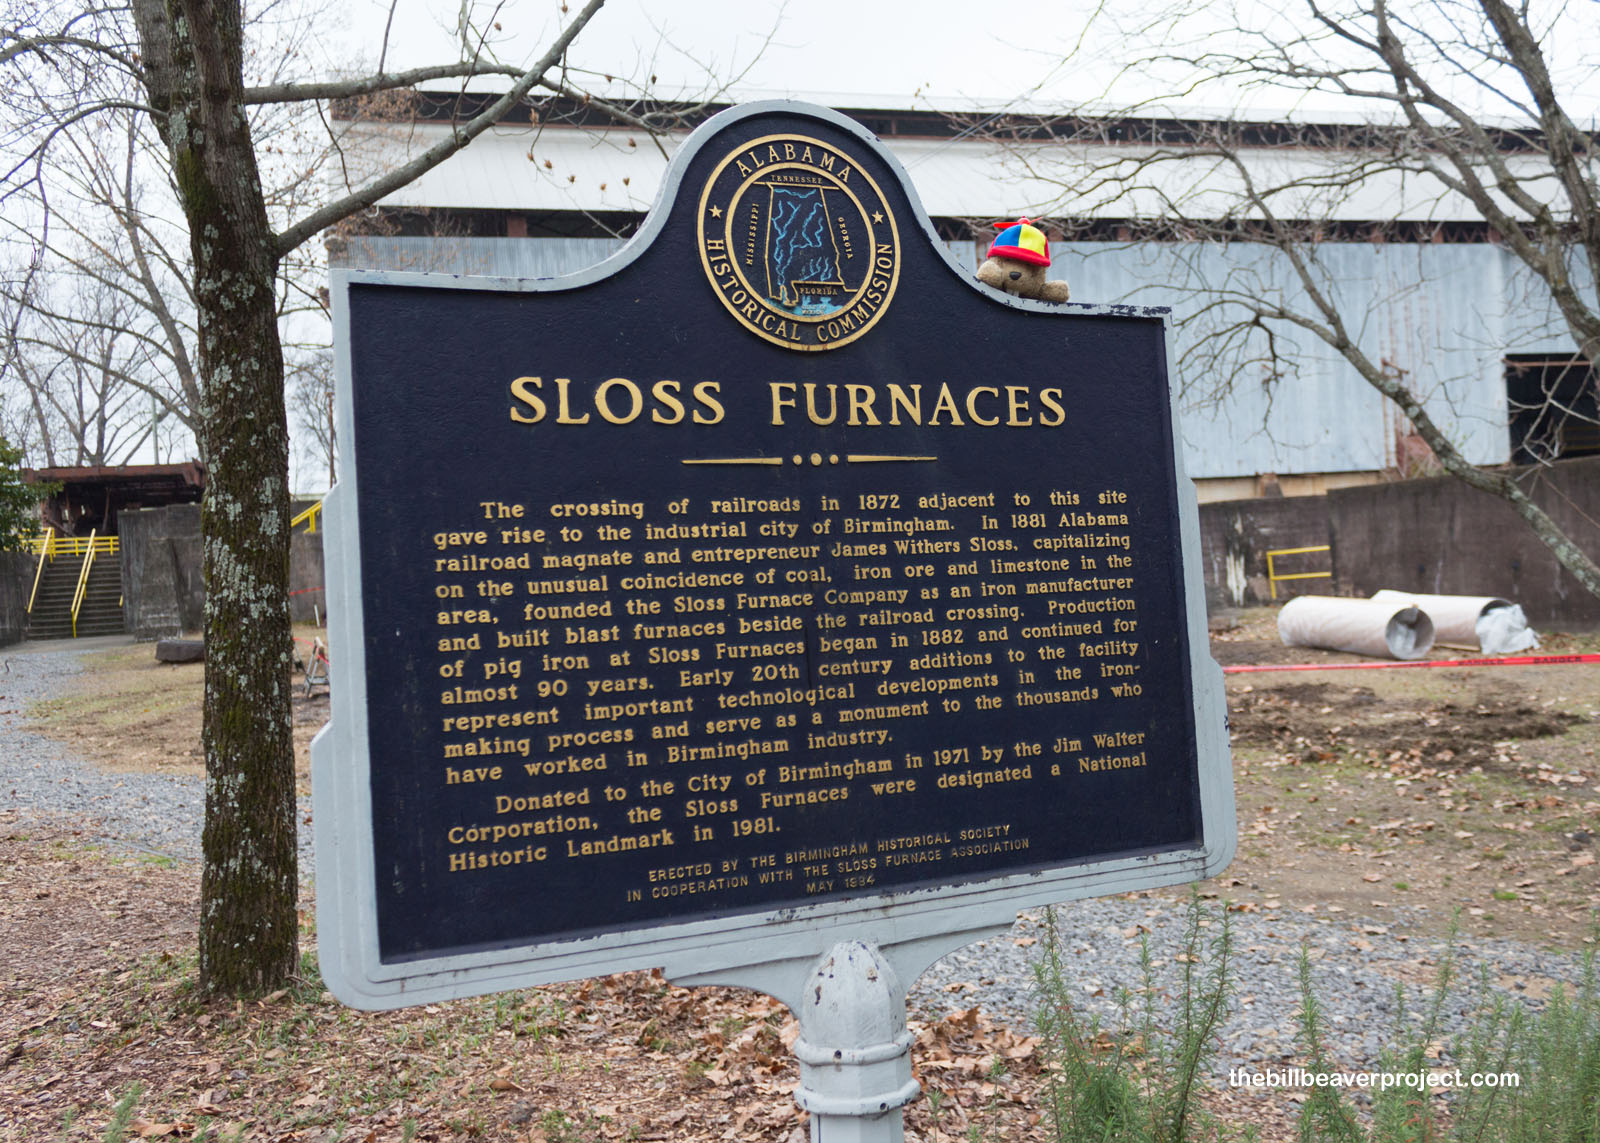 The state landmark plaque for the Sloss Furnaces!